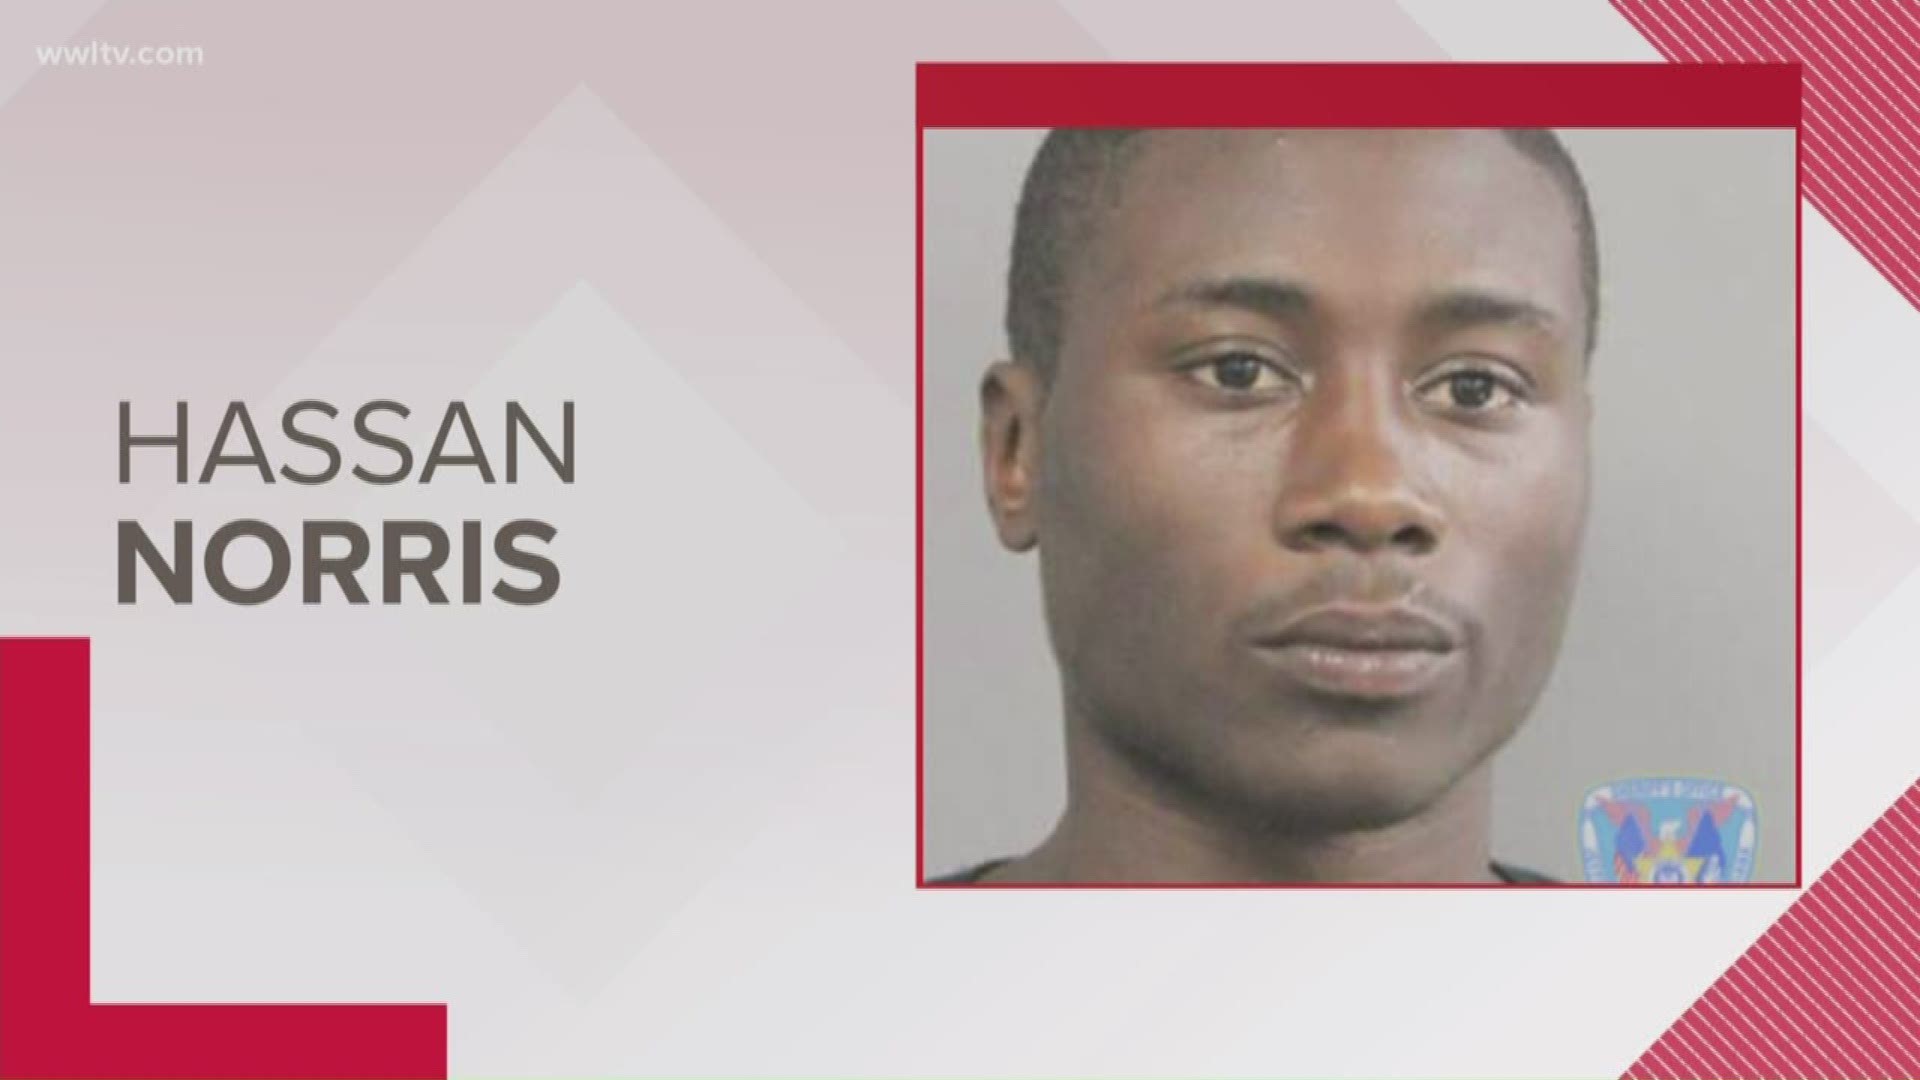 Police are looking for 20-year-old Hassan Norris because they say he fired a shot at an officer following a chase Monday before noon in Kenner and Metairie.